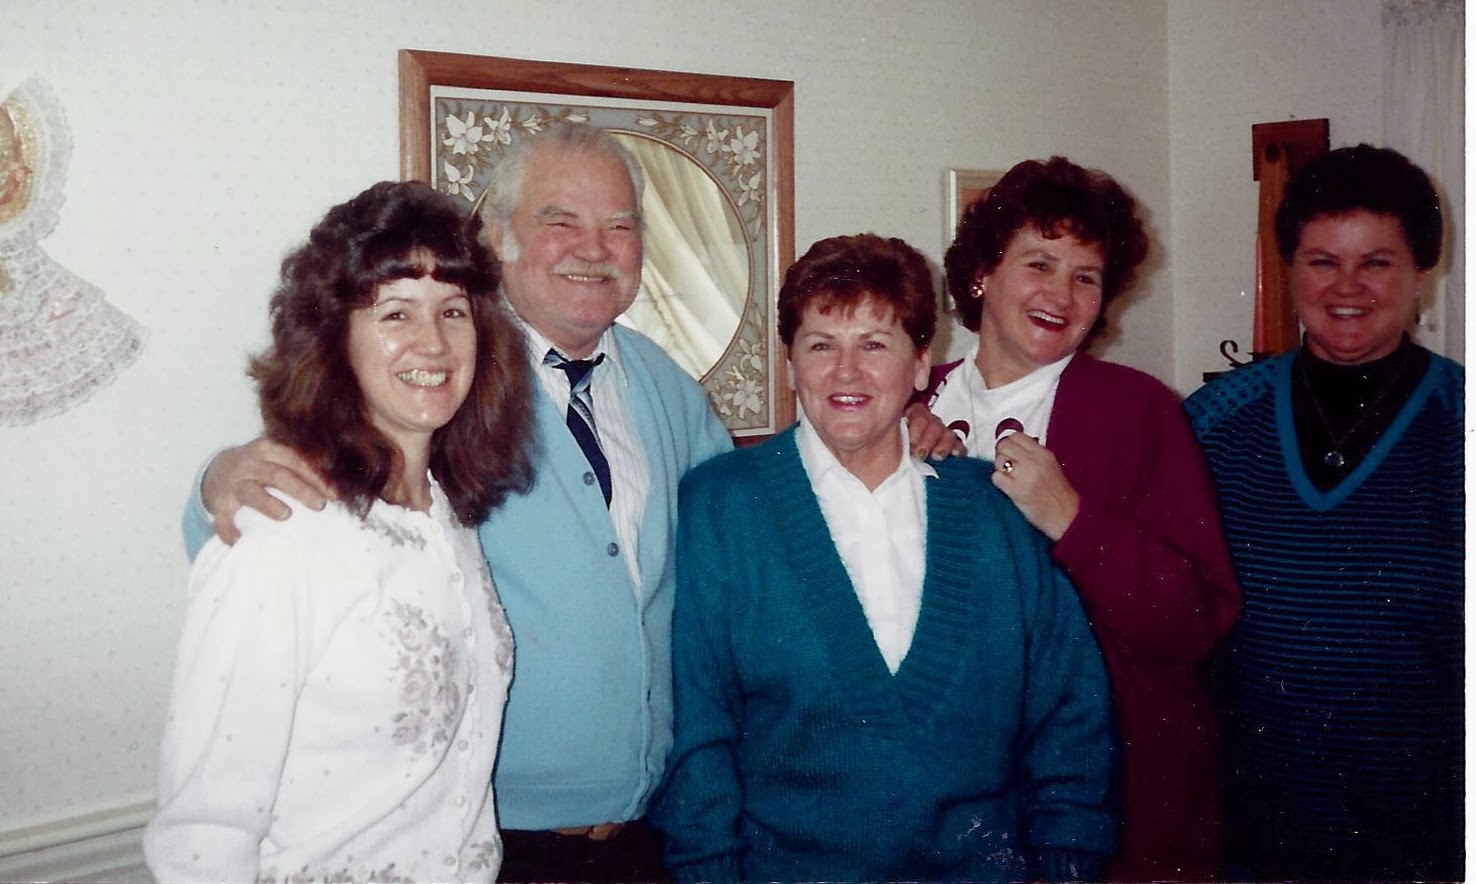 Your Great Uncle Ted, Aunt Betty, Mom and Aunt Judy